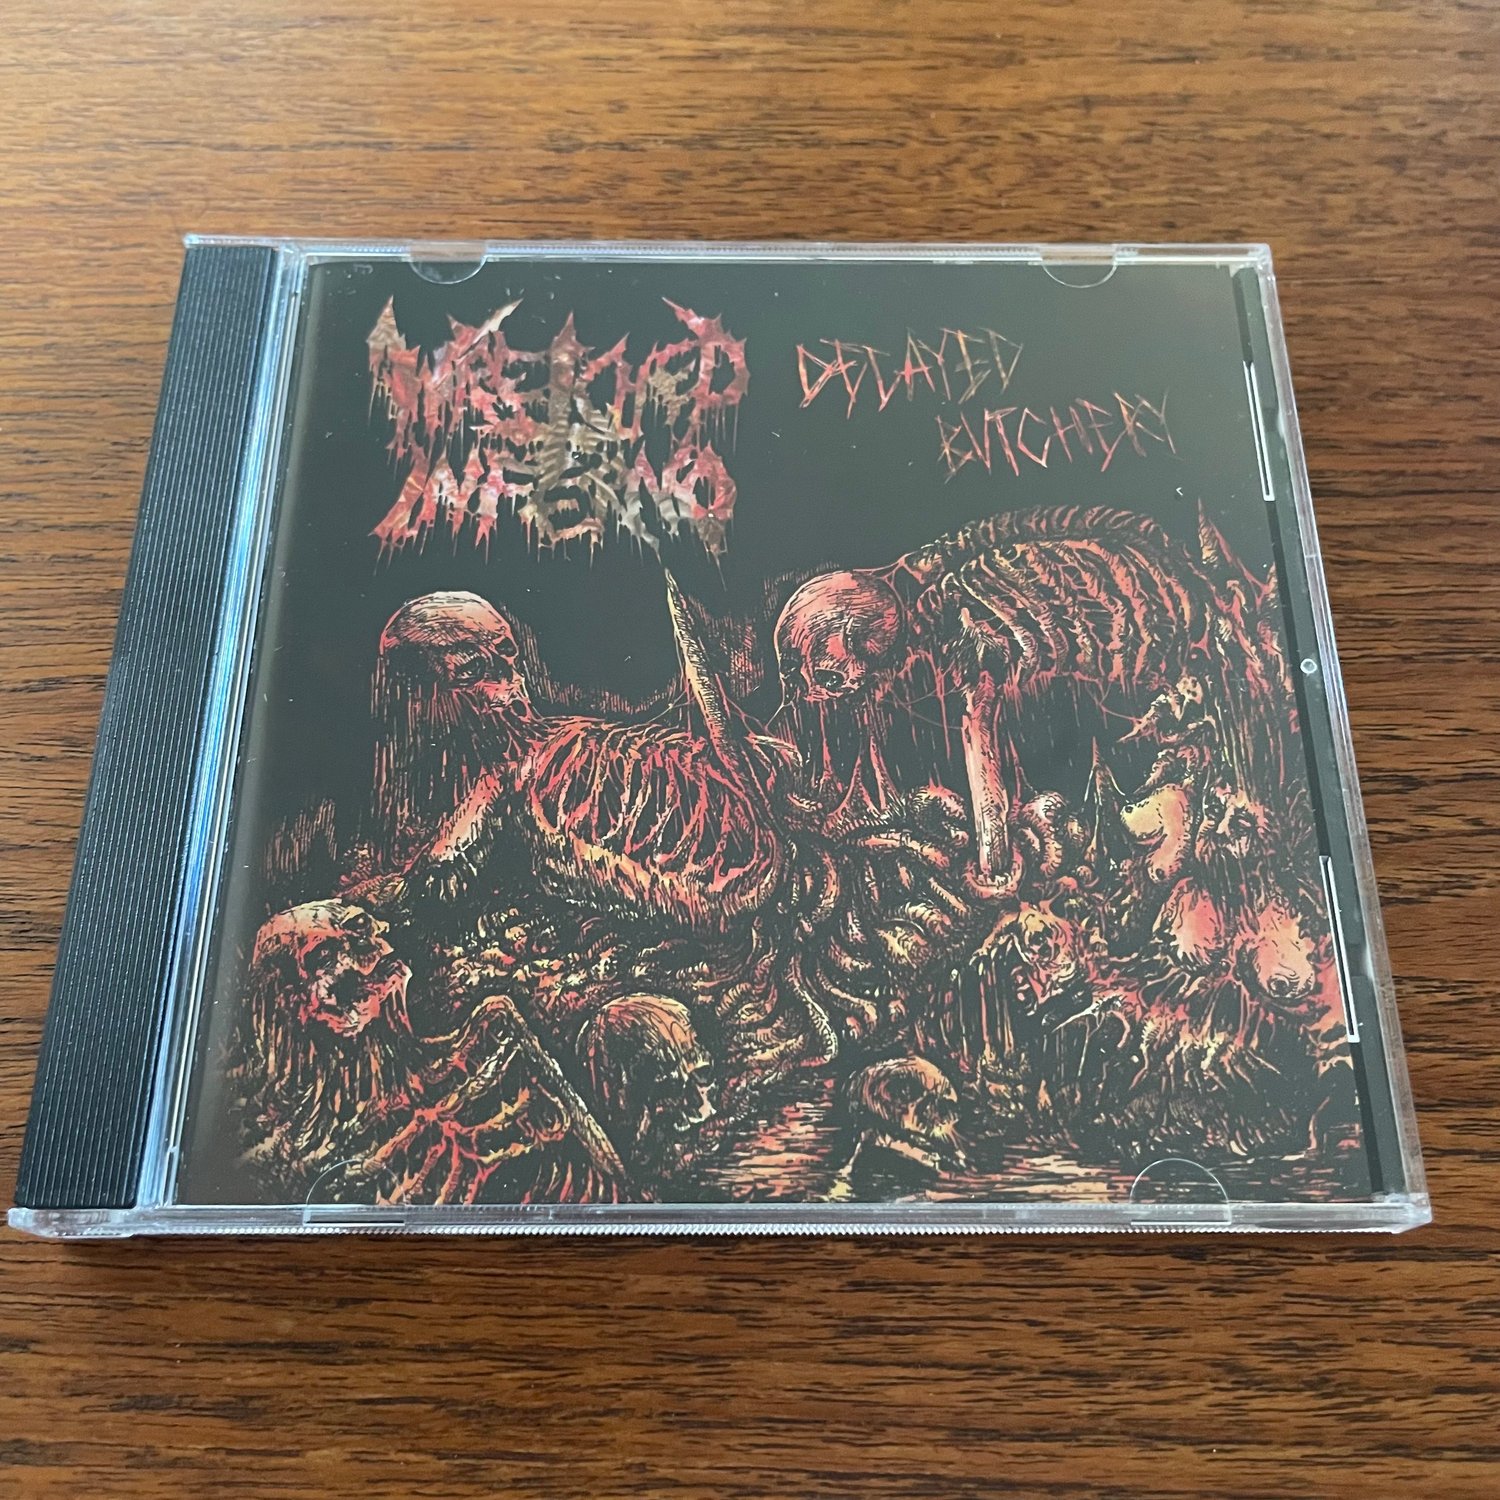 Wretched Inferno - Decayed Butchery